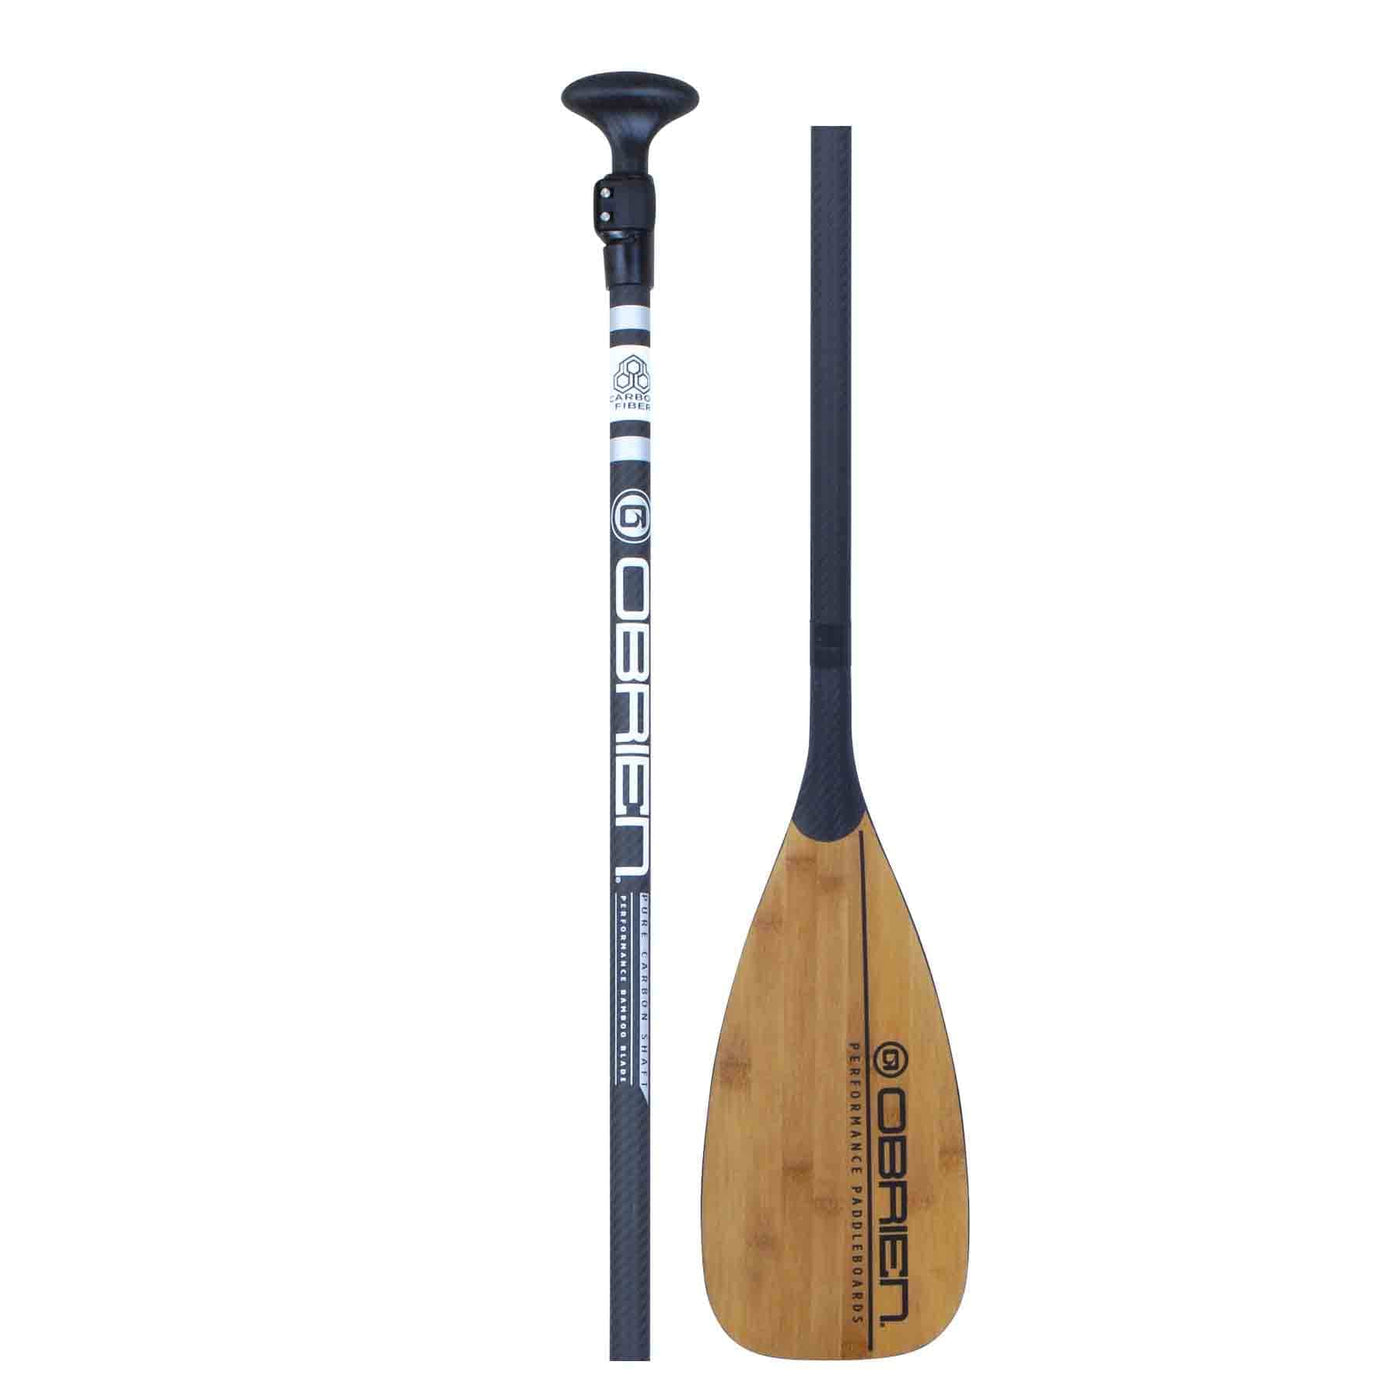 O'Brien 3-Piece Carbon Paddle with 7" Bamboo Blade O'Brien